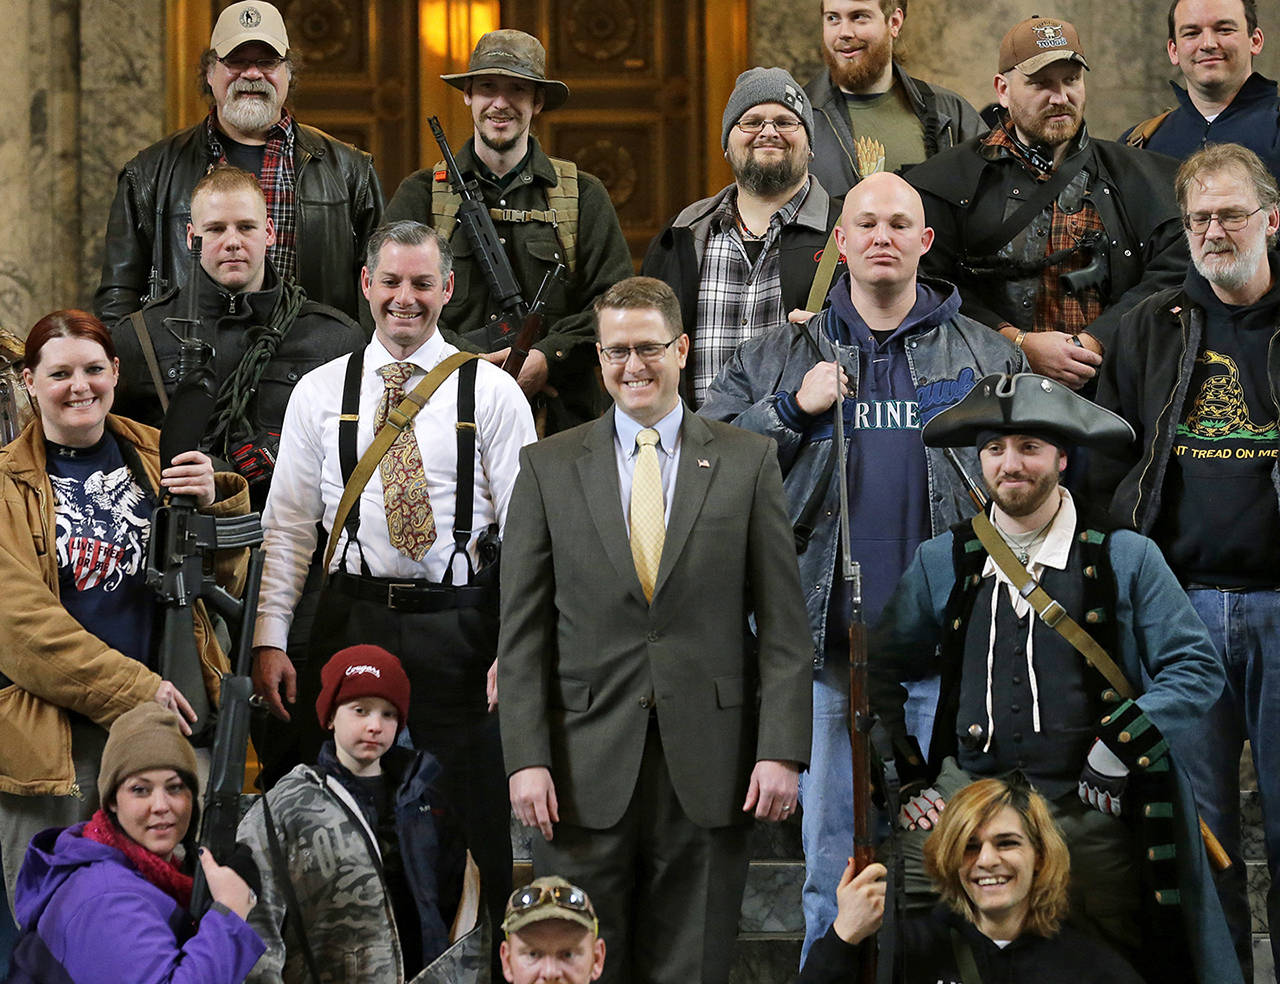 In this 2015 photo, Washington Rep. Matt Shea, R-Spokane Valley (center), poses for a group photo with gun owners inside the Capitol in Olympia, following a gun-rights rally. (AP Photo/Ted S. Warren, File)